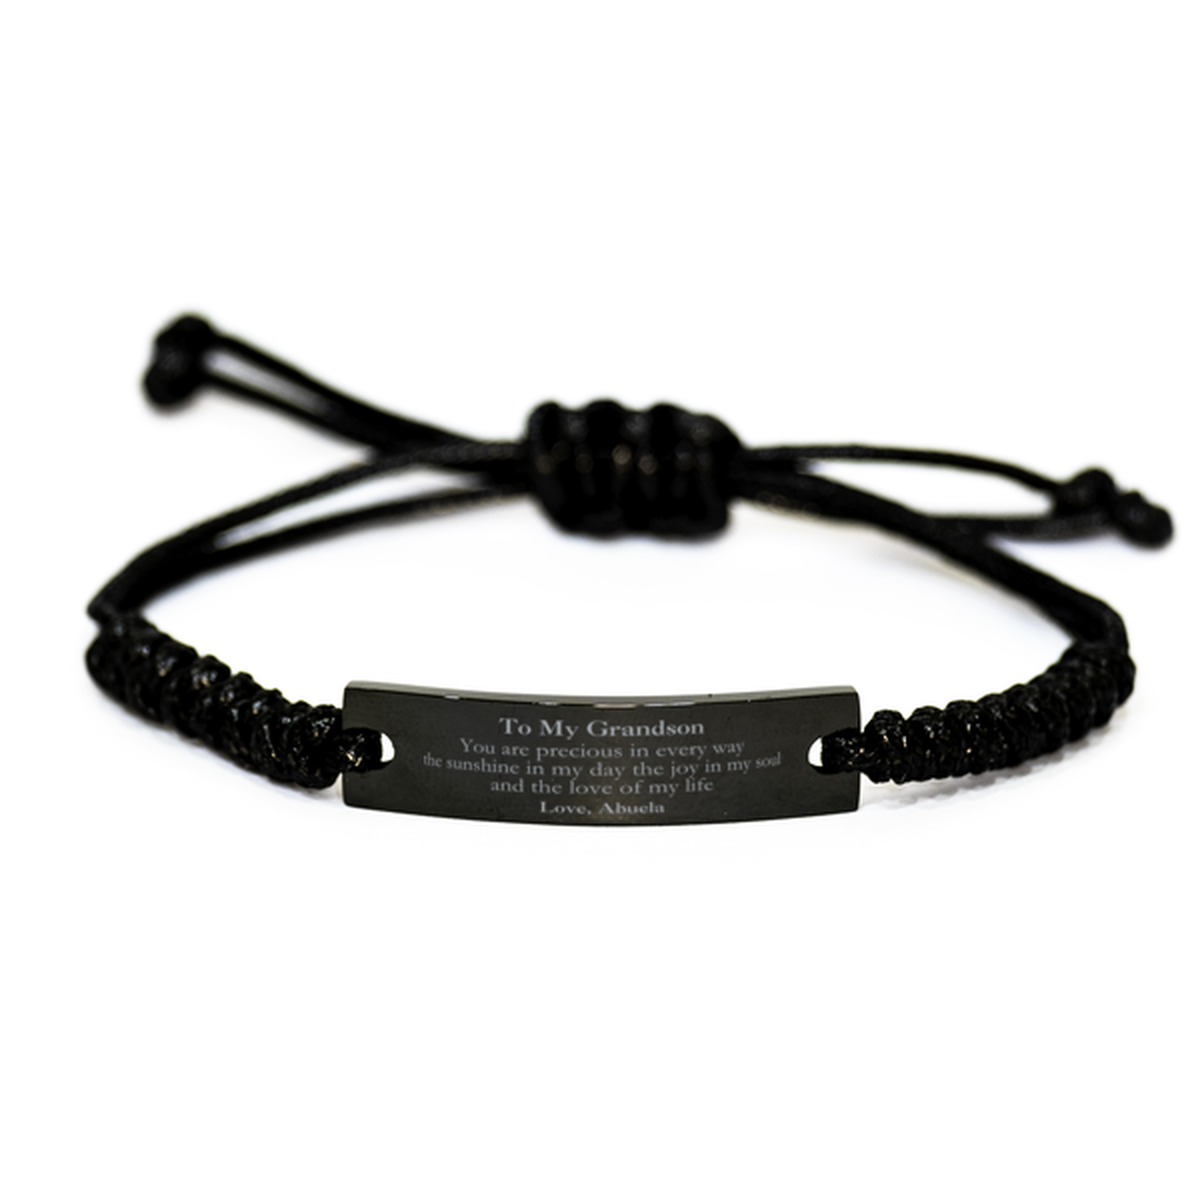 Graduation Gifts for Grandson Black Rope Bracelet Present from Abuela, Christmas Grandson Birthday Gifts Grandson You are precious in every way the sunshine in my day. Love, Abuela